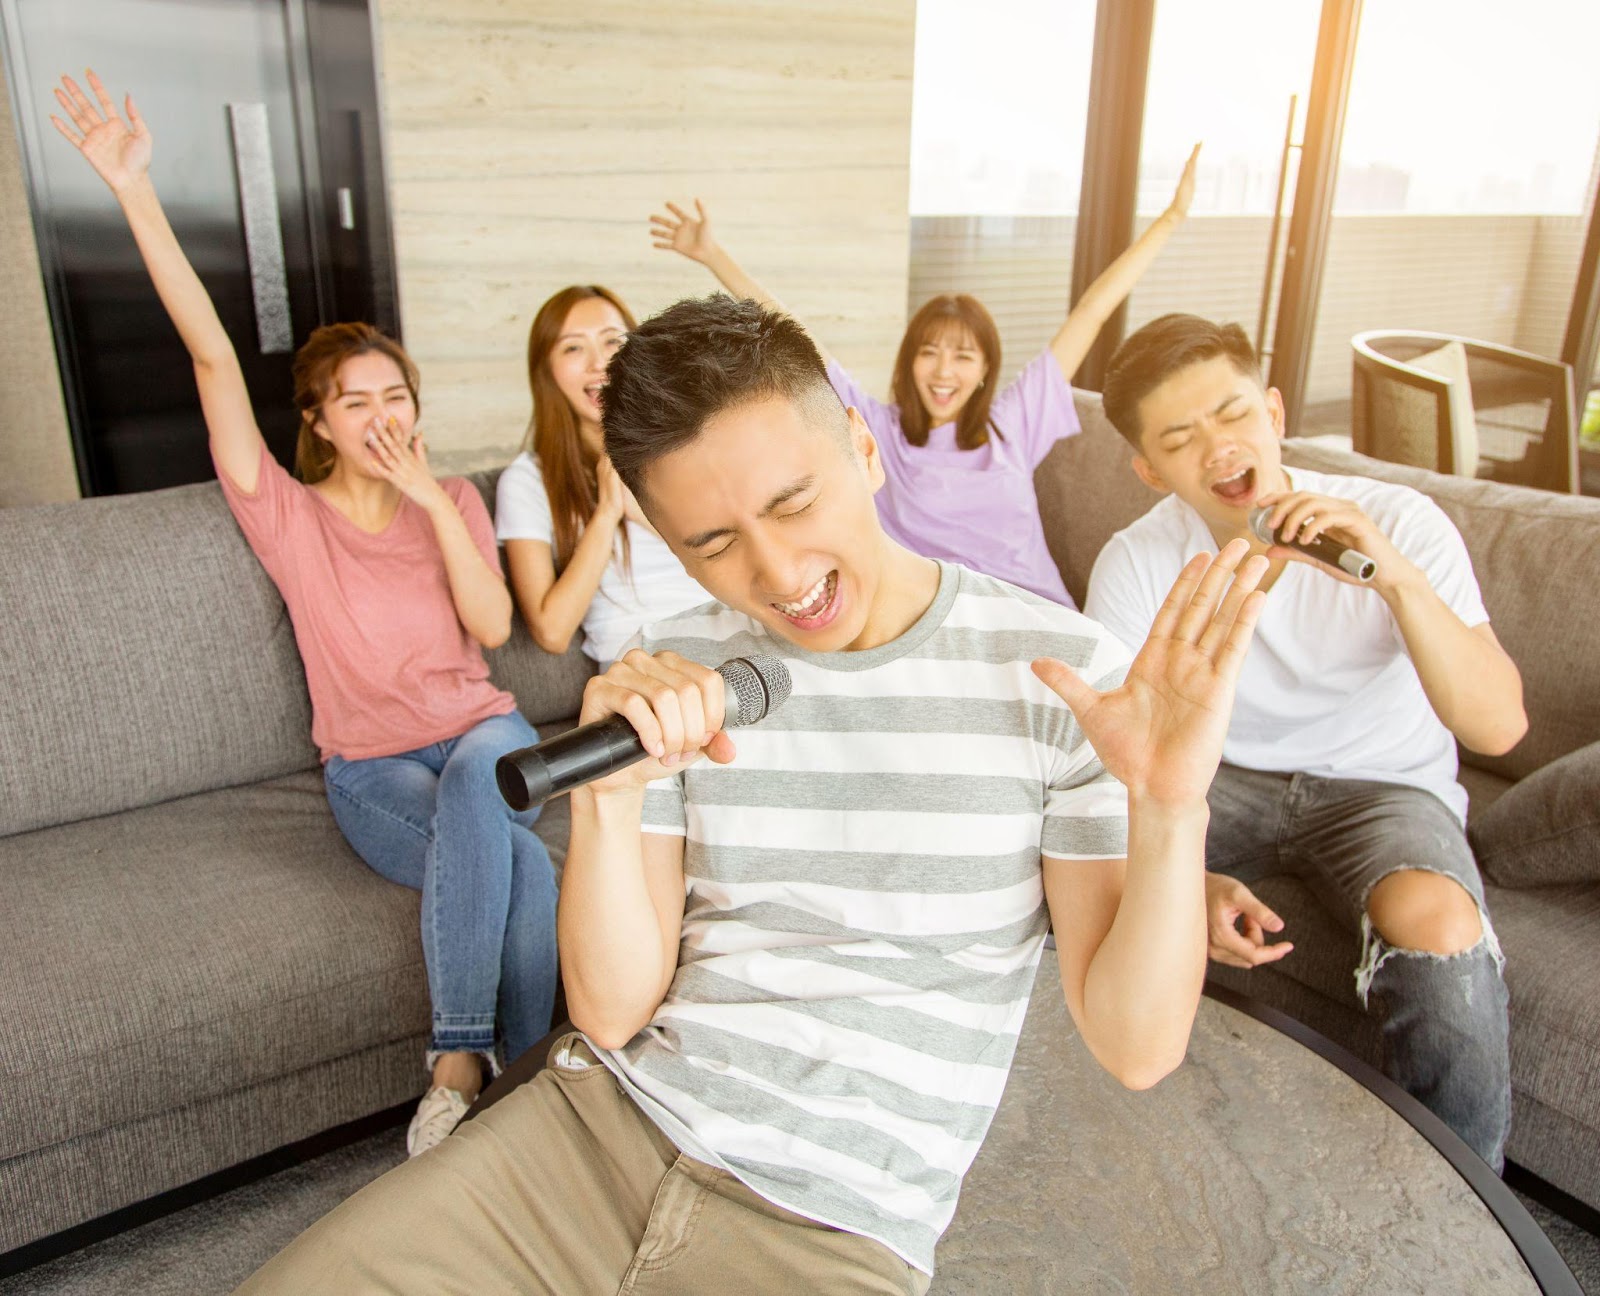 5 Reasons Why You Should Get A Home Karaoke System Right Now